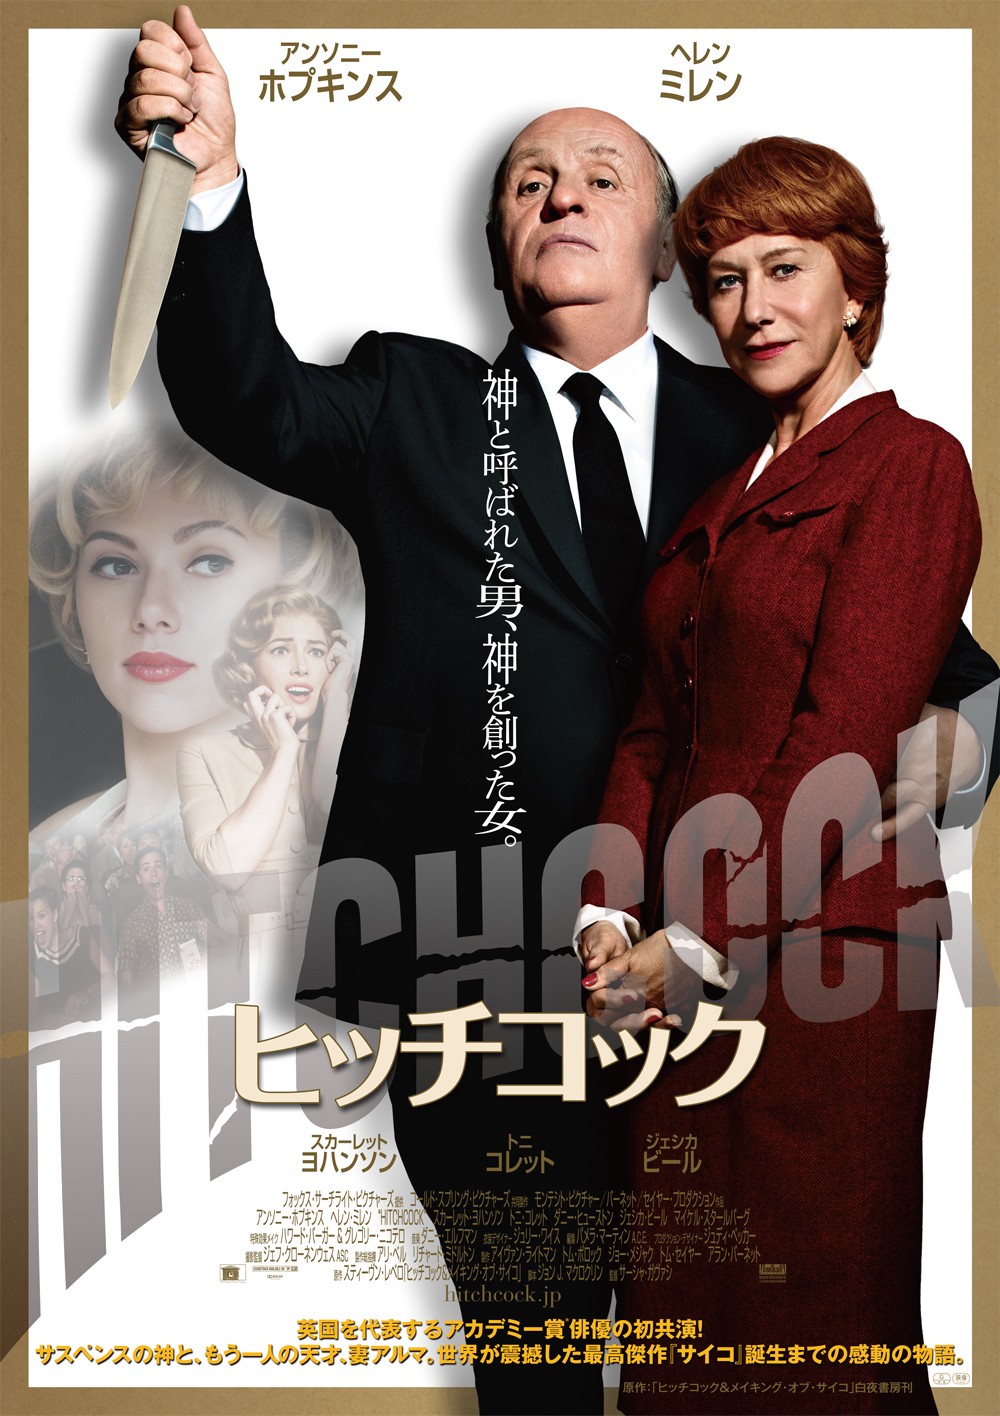 Extra Large Movie Poster Image for Hitchcock (#7 of 7)